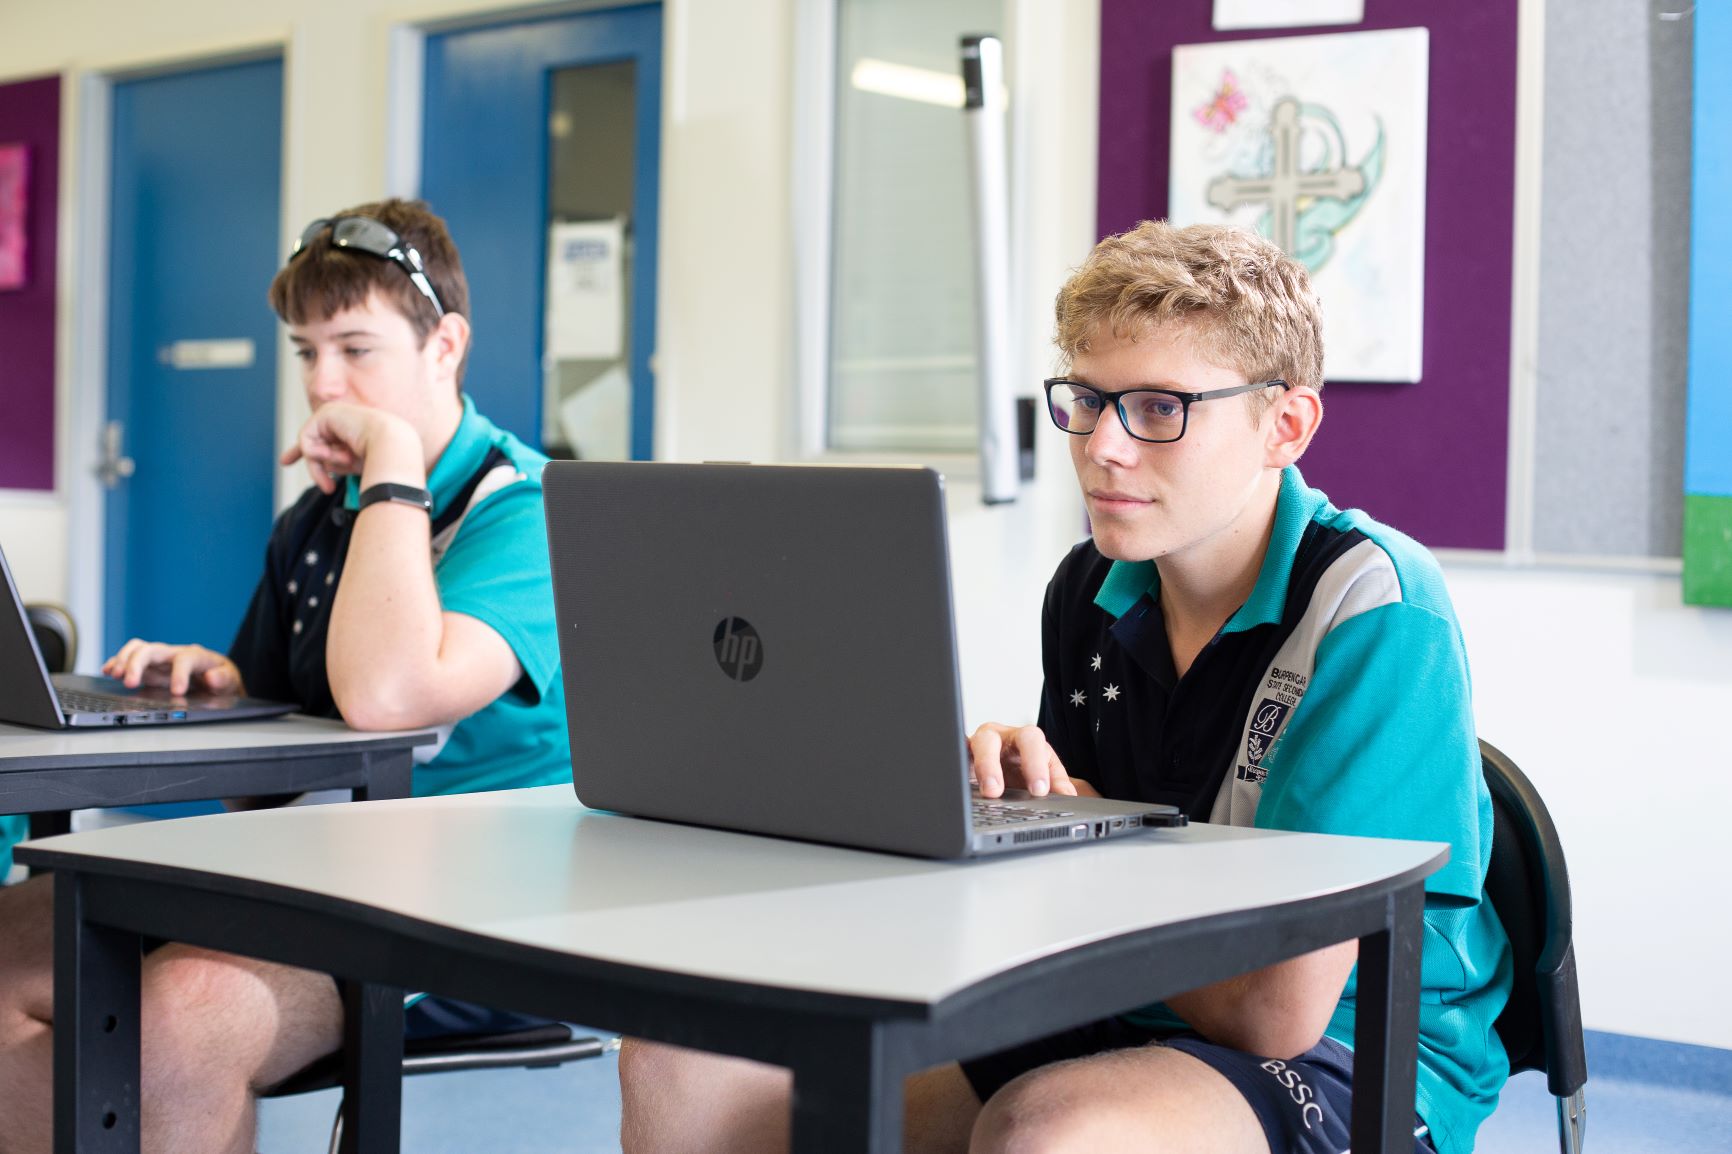 Students in school uniform are focused on using computers